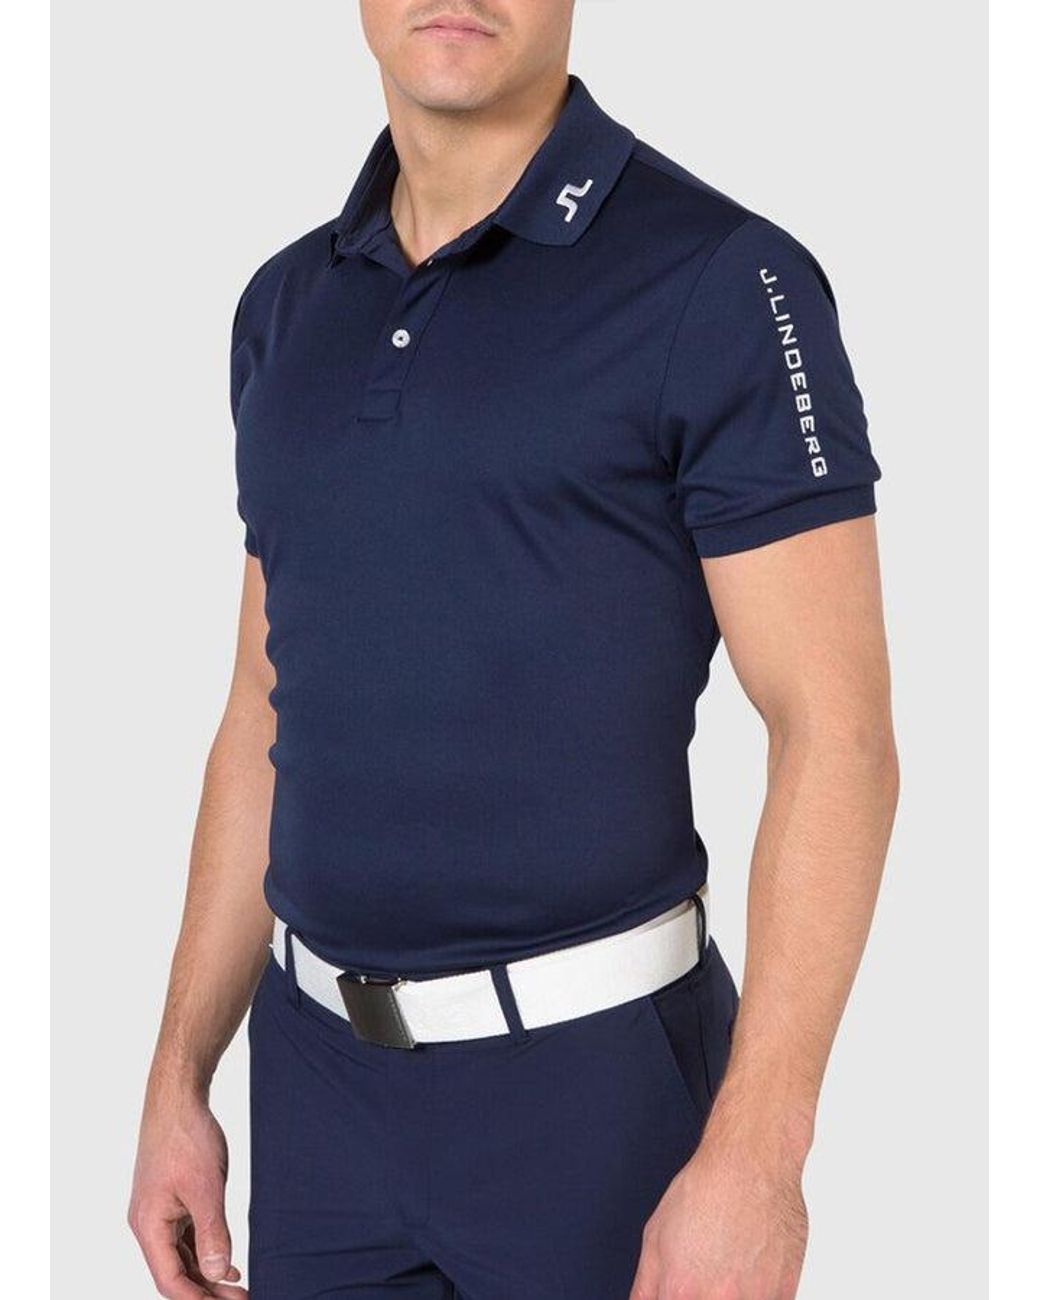 J.Lindeberg Tour Tech Golf Polo in Blue | Lyst